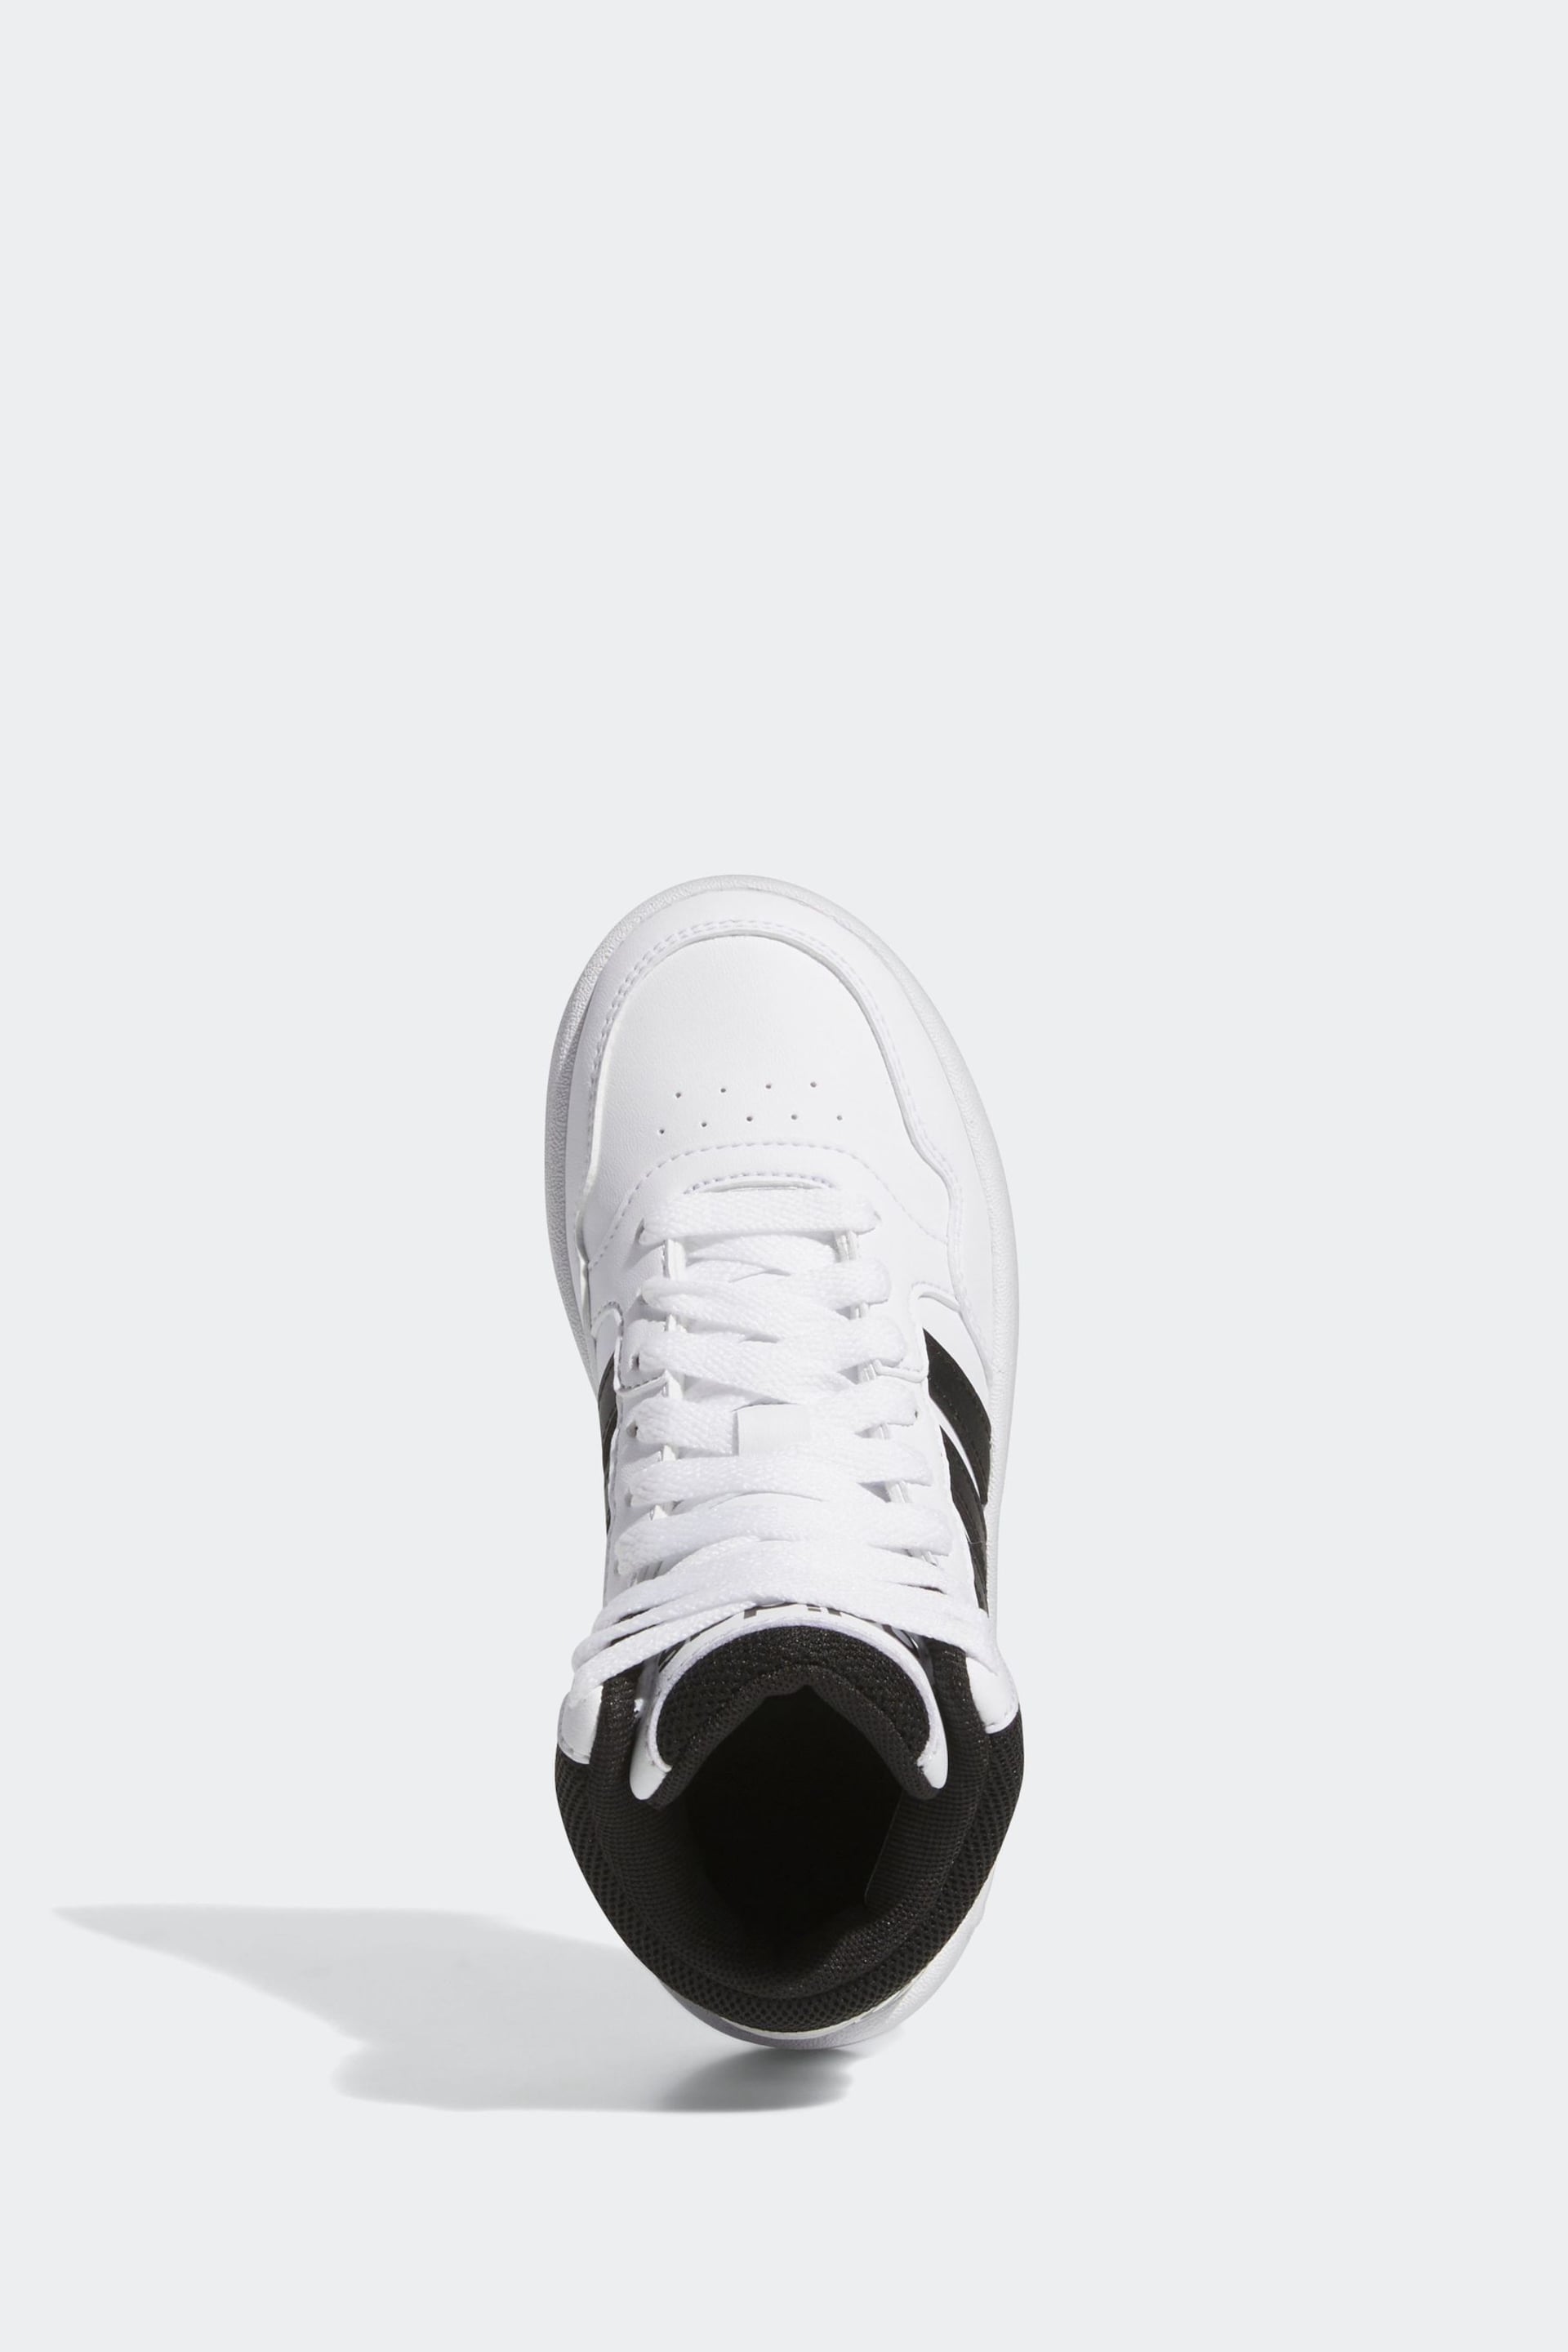 adidas White/black Hoops Mid Shoes - Image 5 of 8